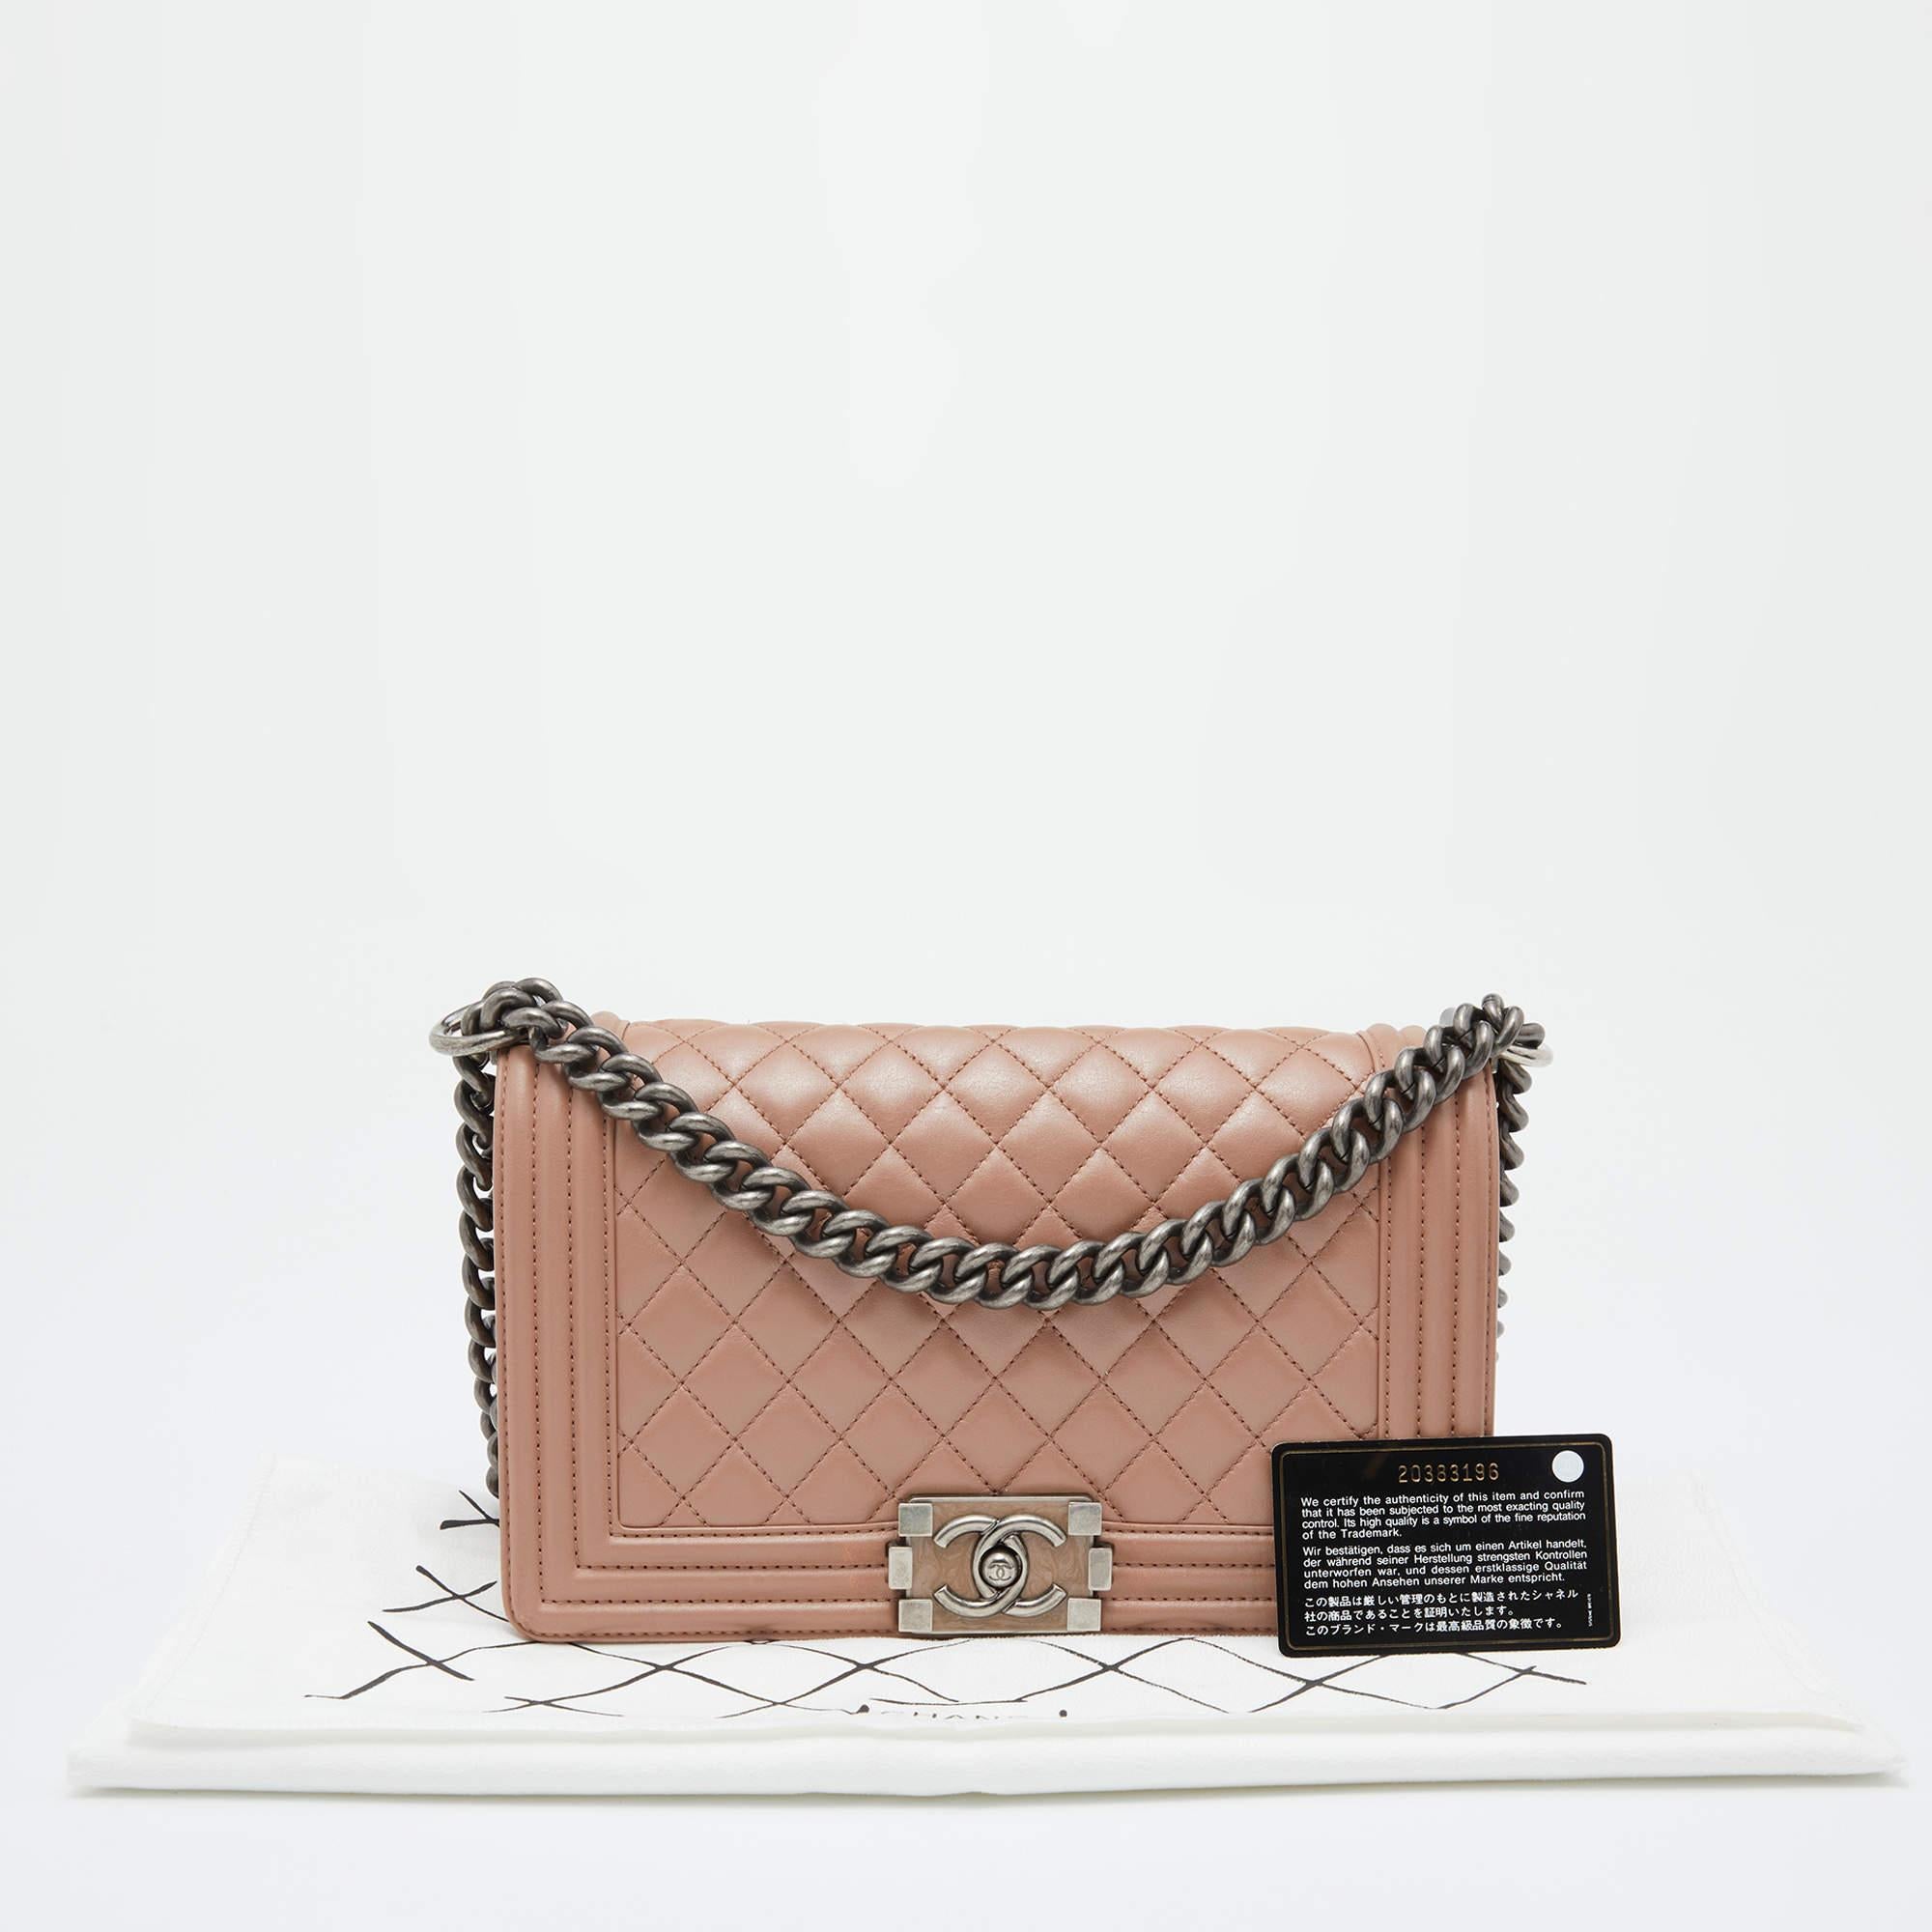 Chanel Beige Quilted Leather Medium Boy Flap Bag 9